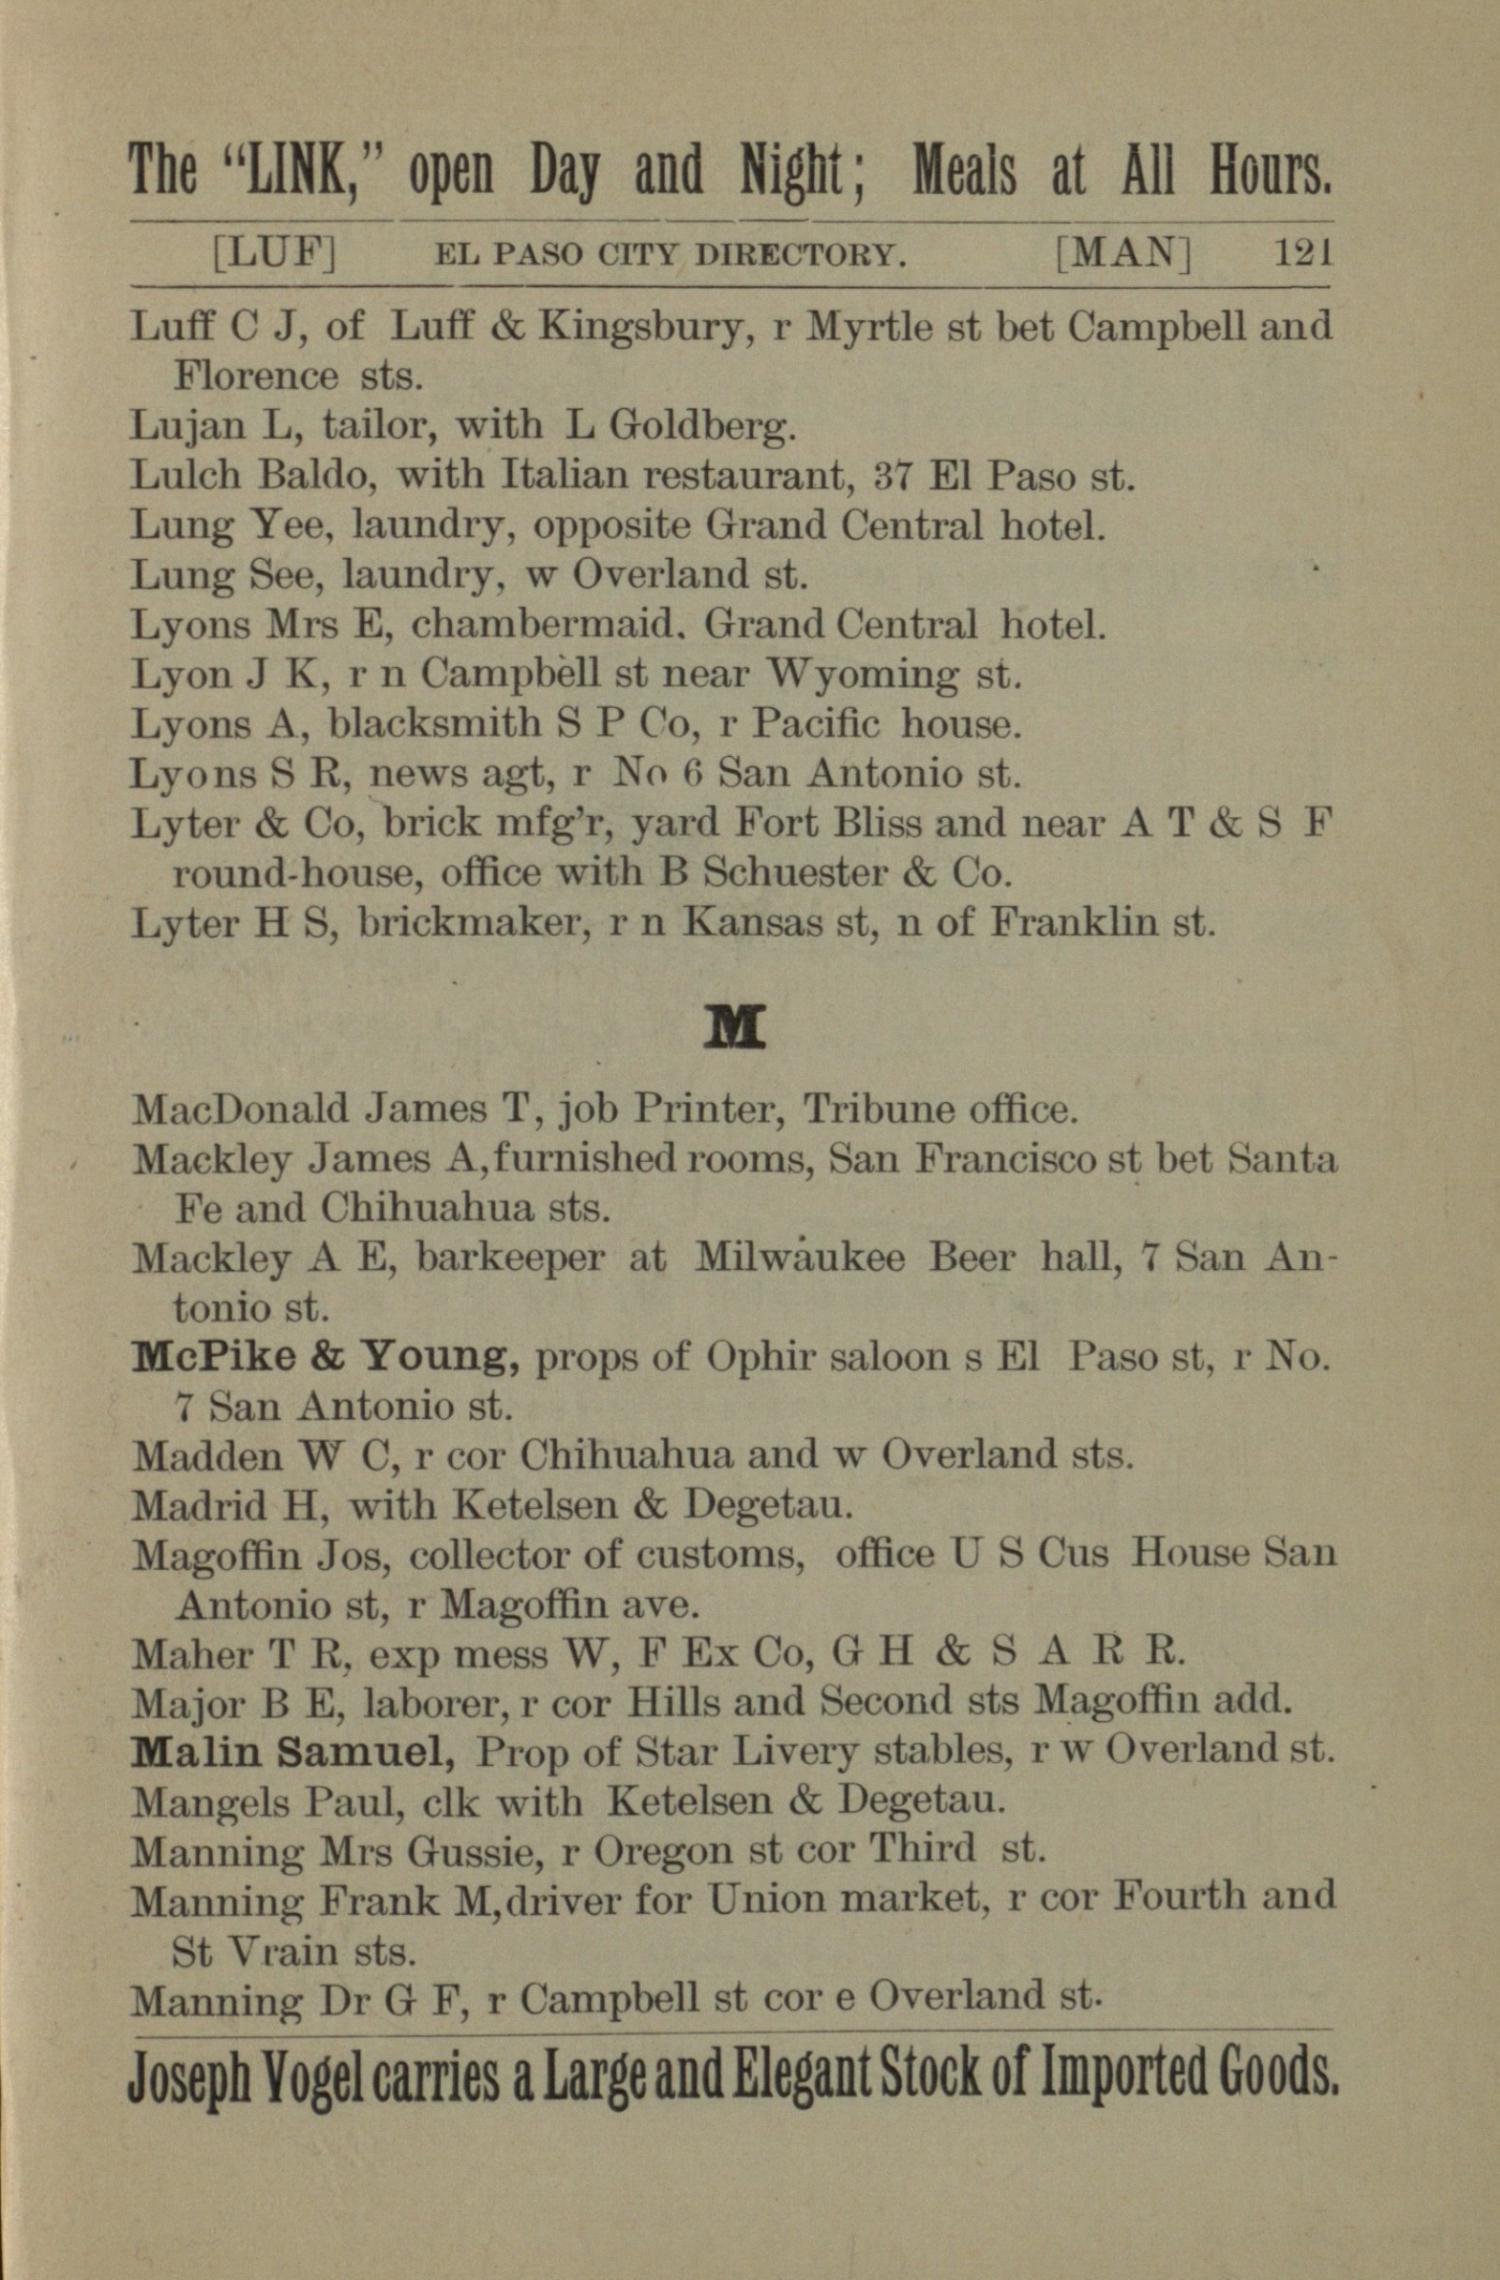 General Directory of the City of El Paso for 1886-87.
                                                
                                                    121
                                                